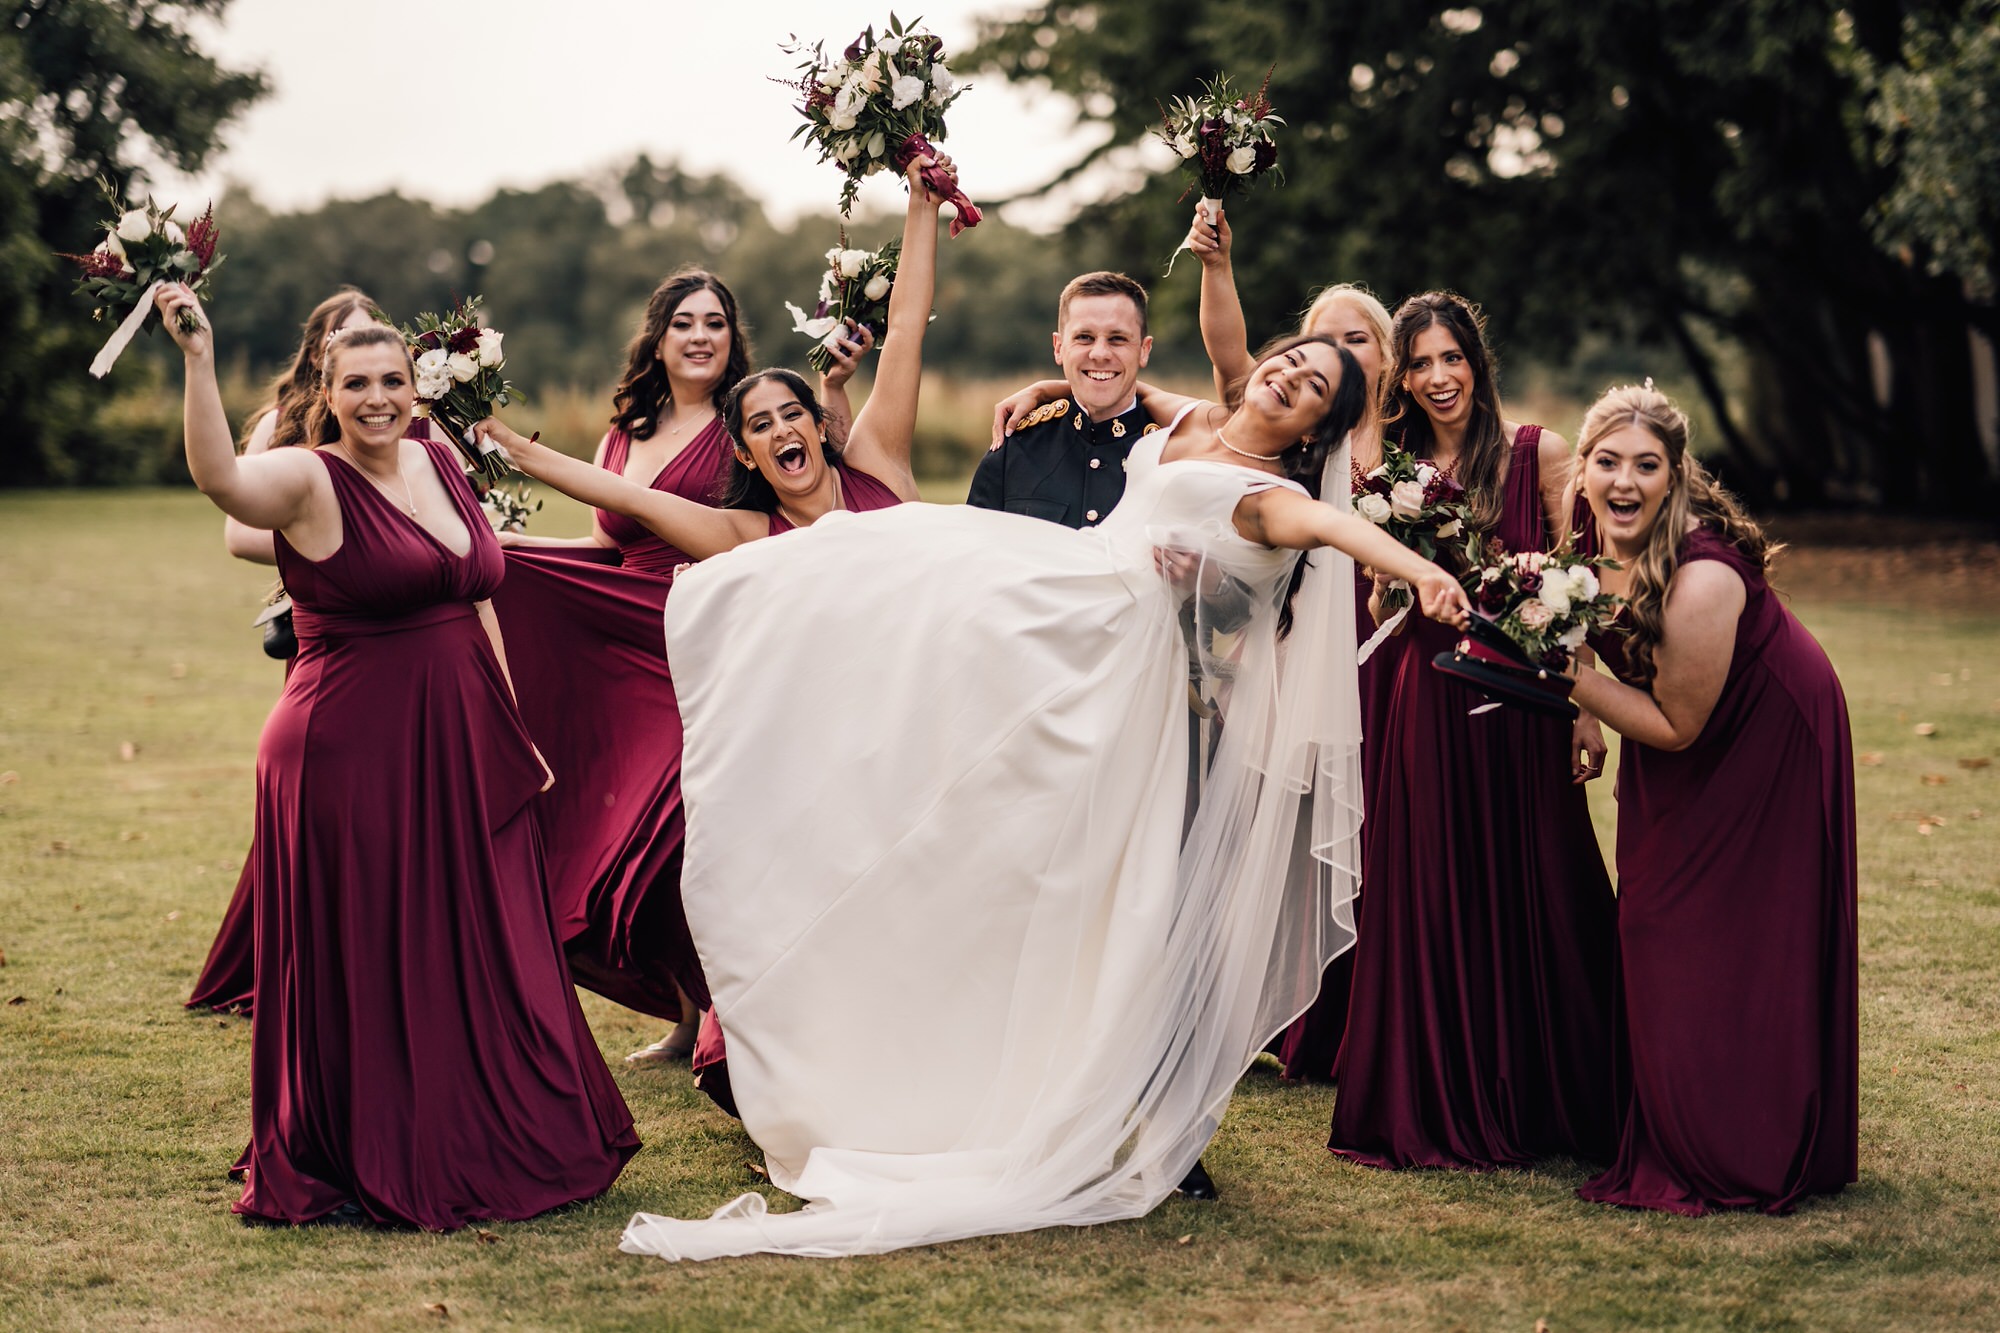 Group photo of bride and groom laughing with bridesmaids 